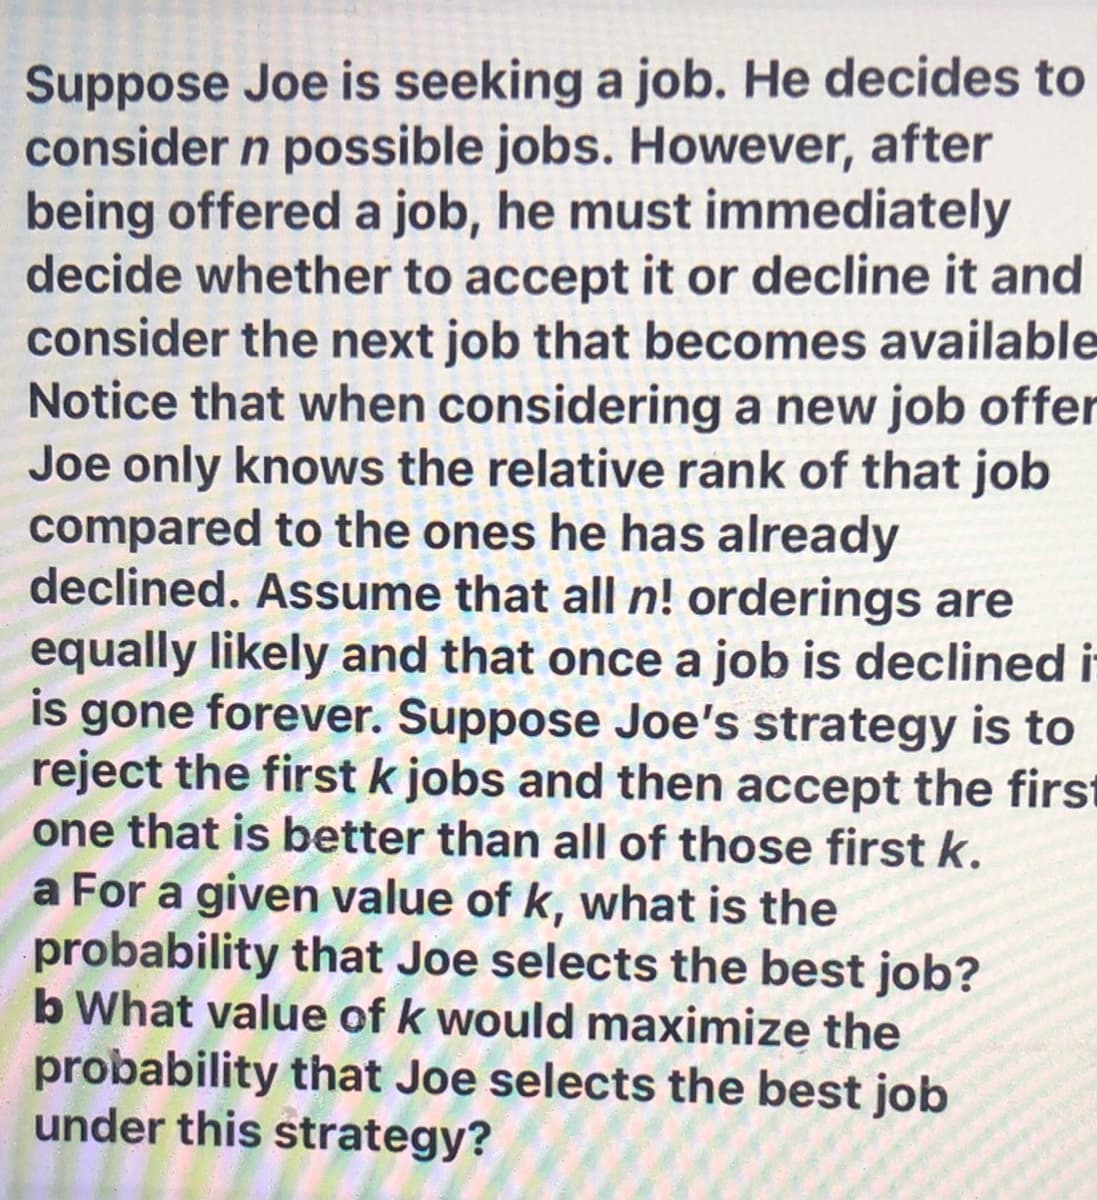 Suppose Joe is seeking a job. He decides to
consider n possible jobs. However, after
being offered a job, he must immediately
decide whether to accept it or decline it and
consider the next job that becomes available
Notice that when considering a new job offer
Joe only knows the relative rank of that job
compared to the ones he has already
declined. Assume that all n! orderings are
equally likely and that once a job is declined i
is gone forever. Suppose Joe's strategy is to
reject the first k jobs and then accept the first
one that is better than all of those first k.
a For a given value of k, what is the
probability that Joe selects the best job?
b What value of k would maximize the
probability that Joe selects the best job
under this strategy?
